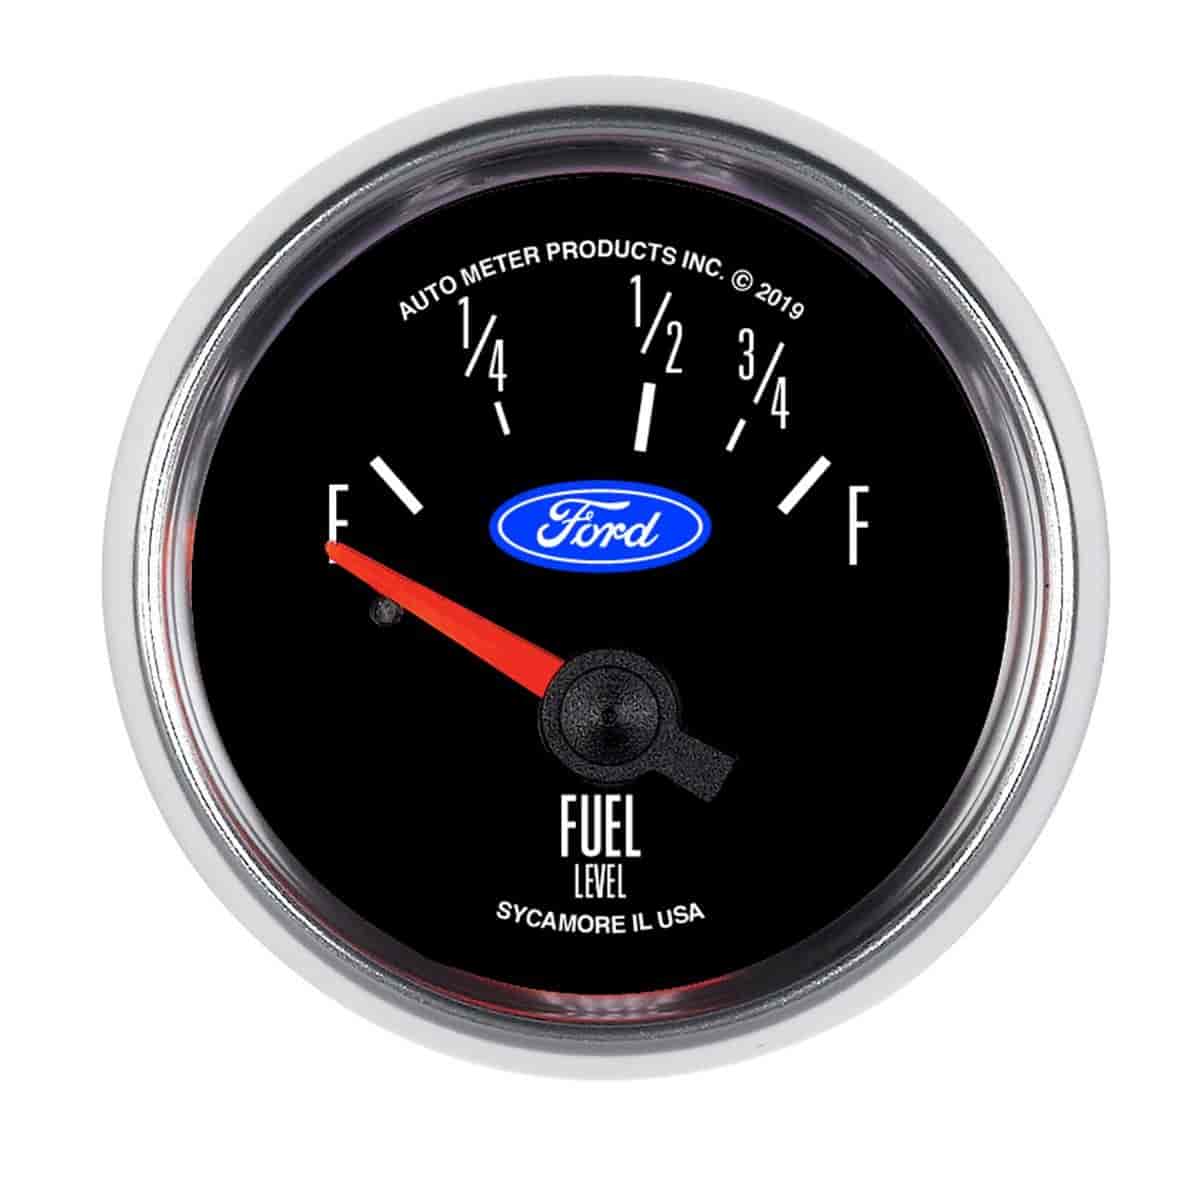 Officially-Licensed Ford Fuel Level Gauge 2 1/16 in.,